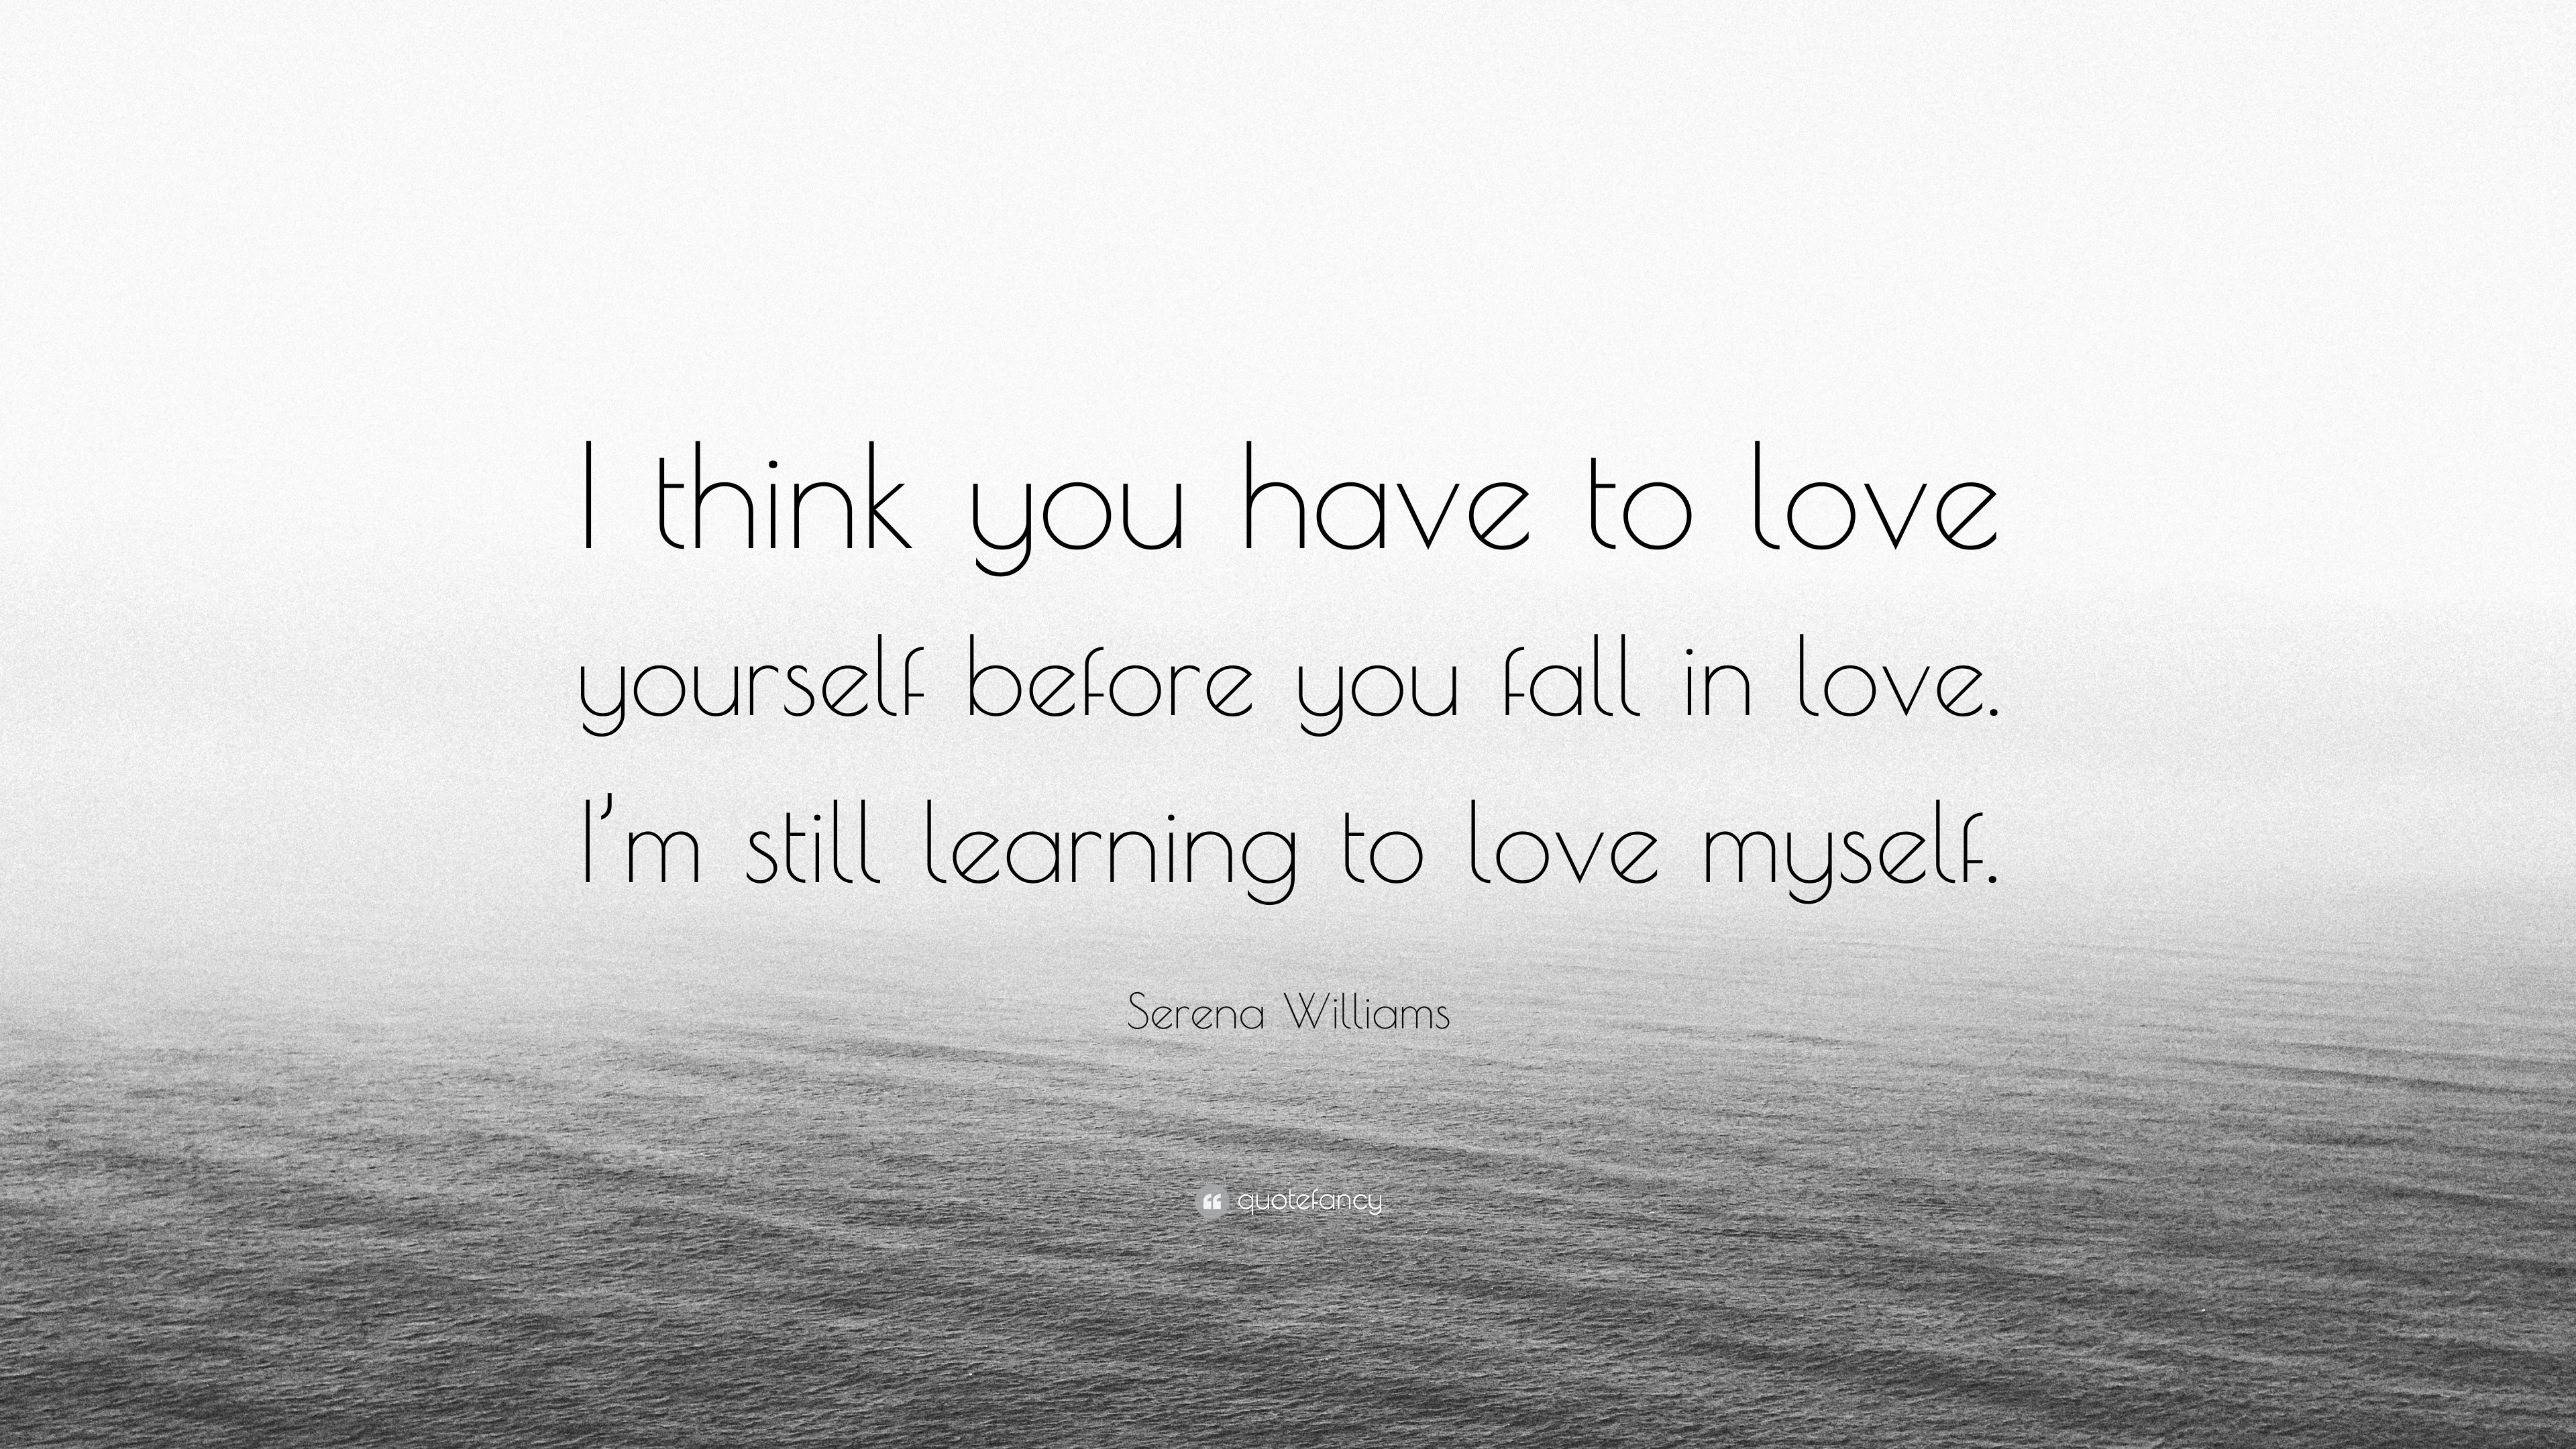 Serena Williams Quote I Think You Have To Love Yourself Before You Fall In Love I